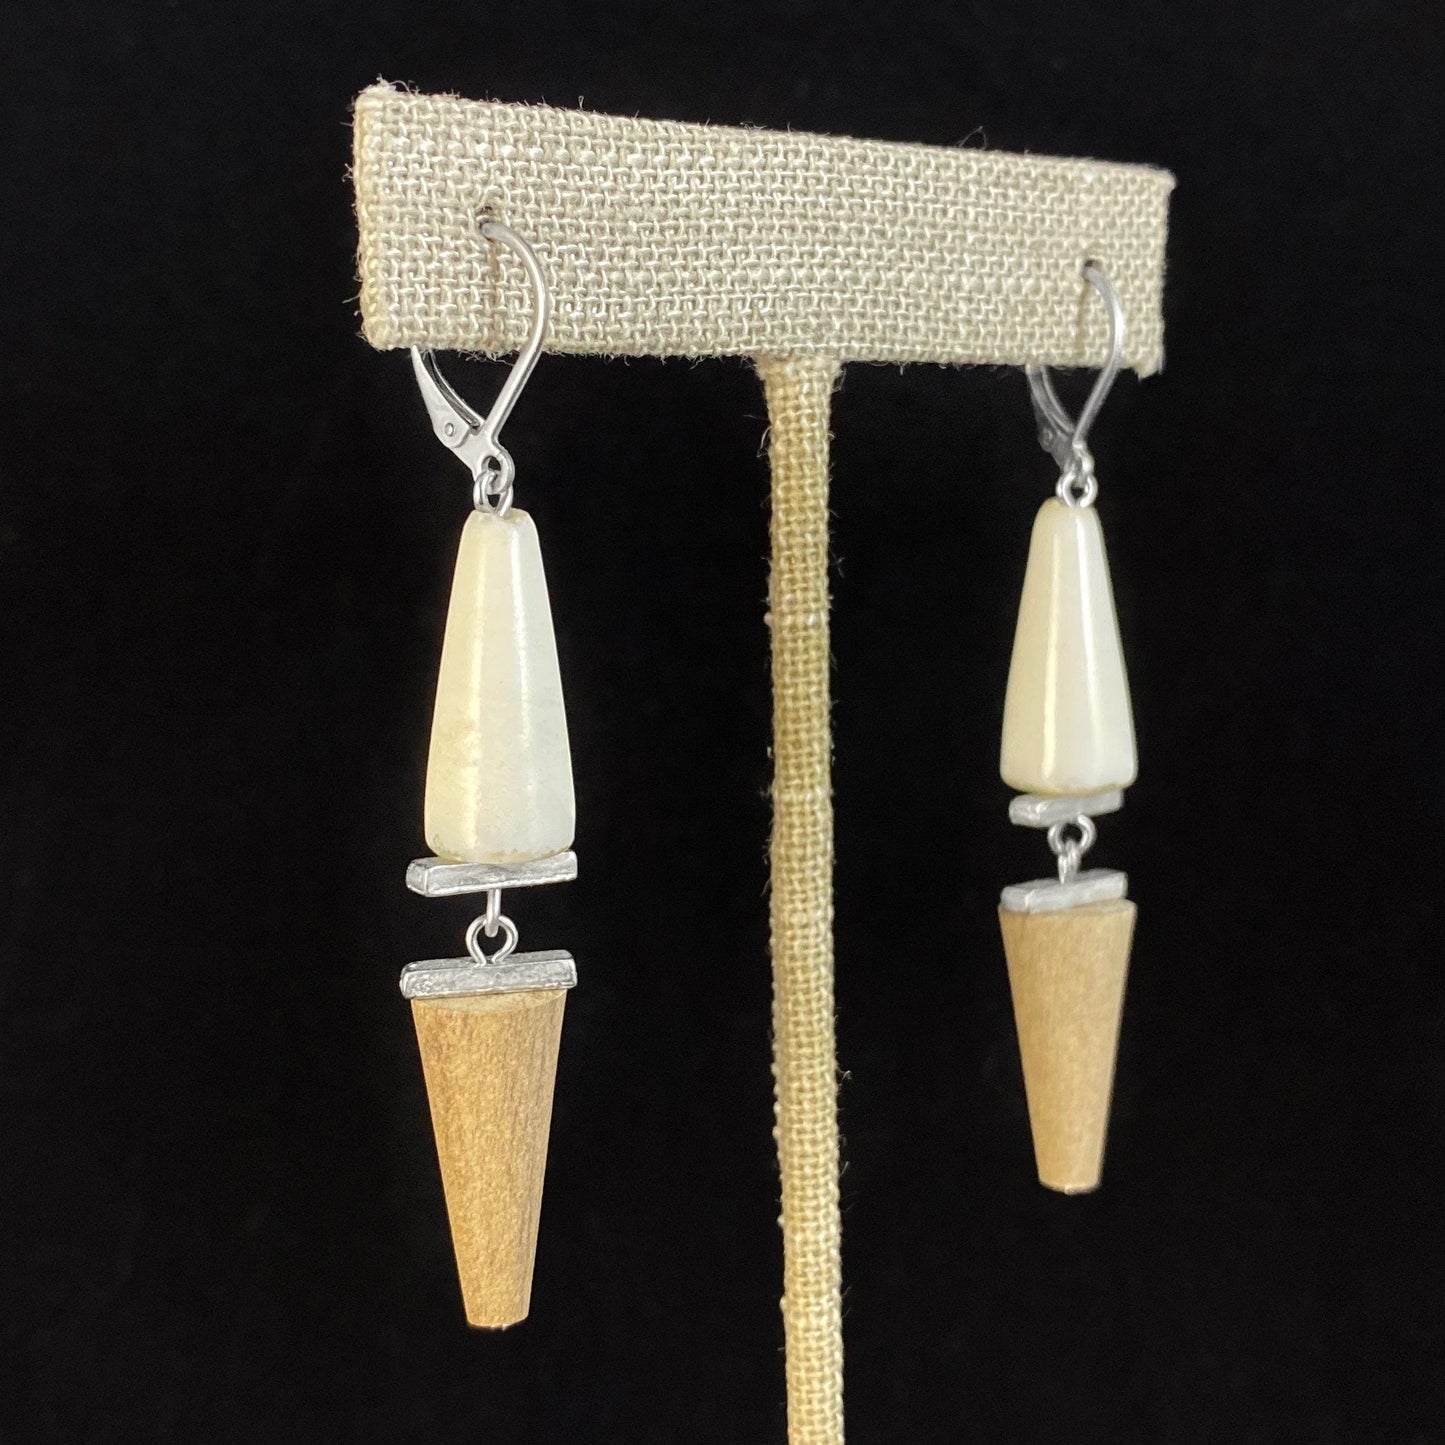 White and Tan Bead Earrings - Handmade in Canada, Anne-Marie Chagnon Jewelry